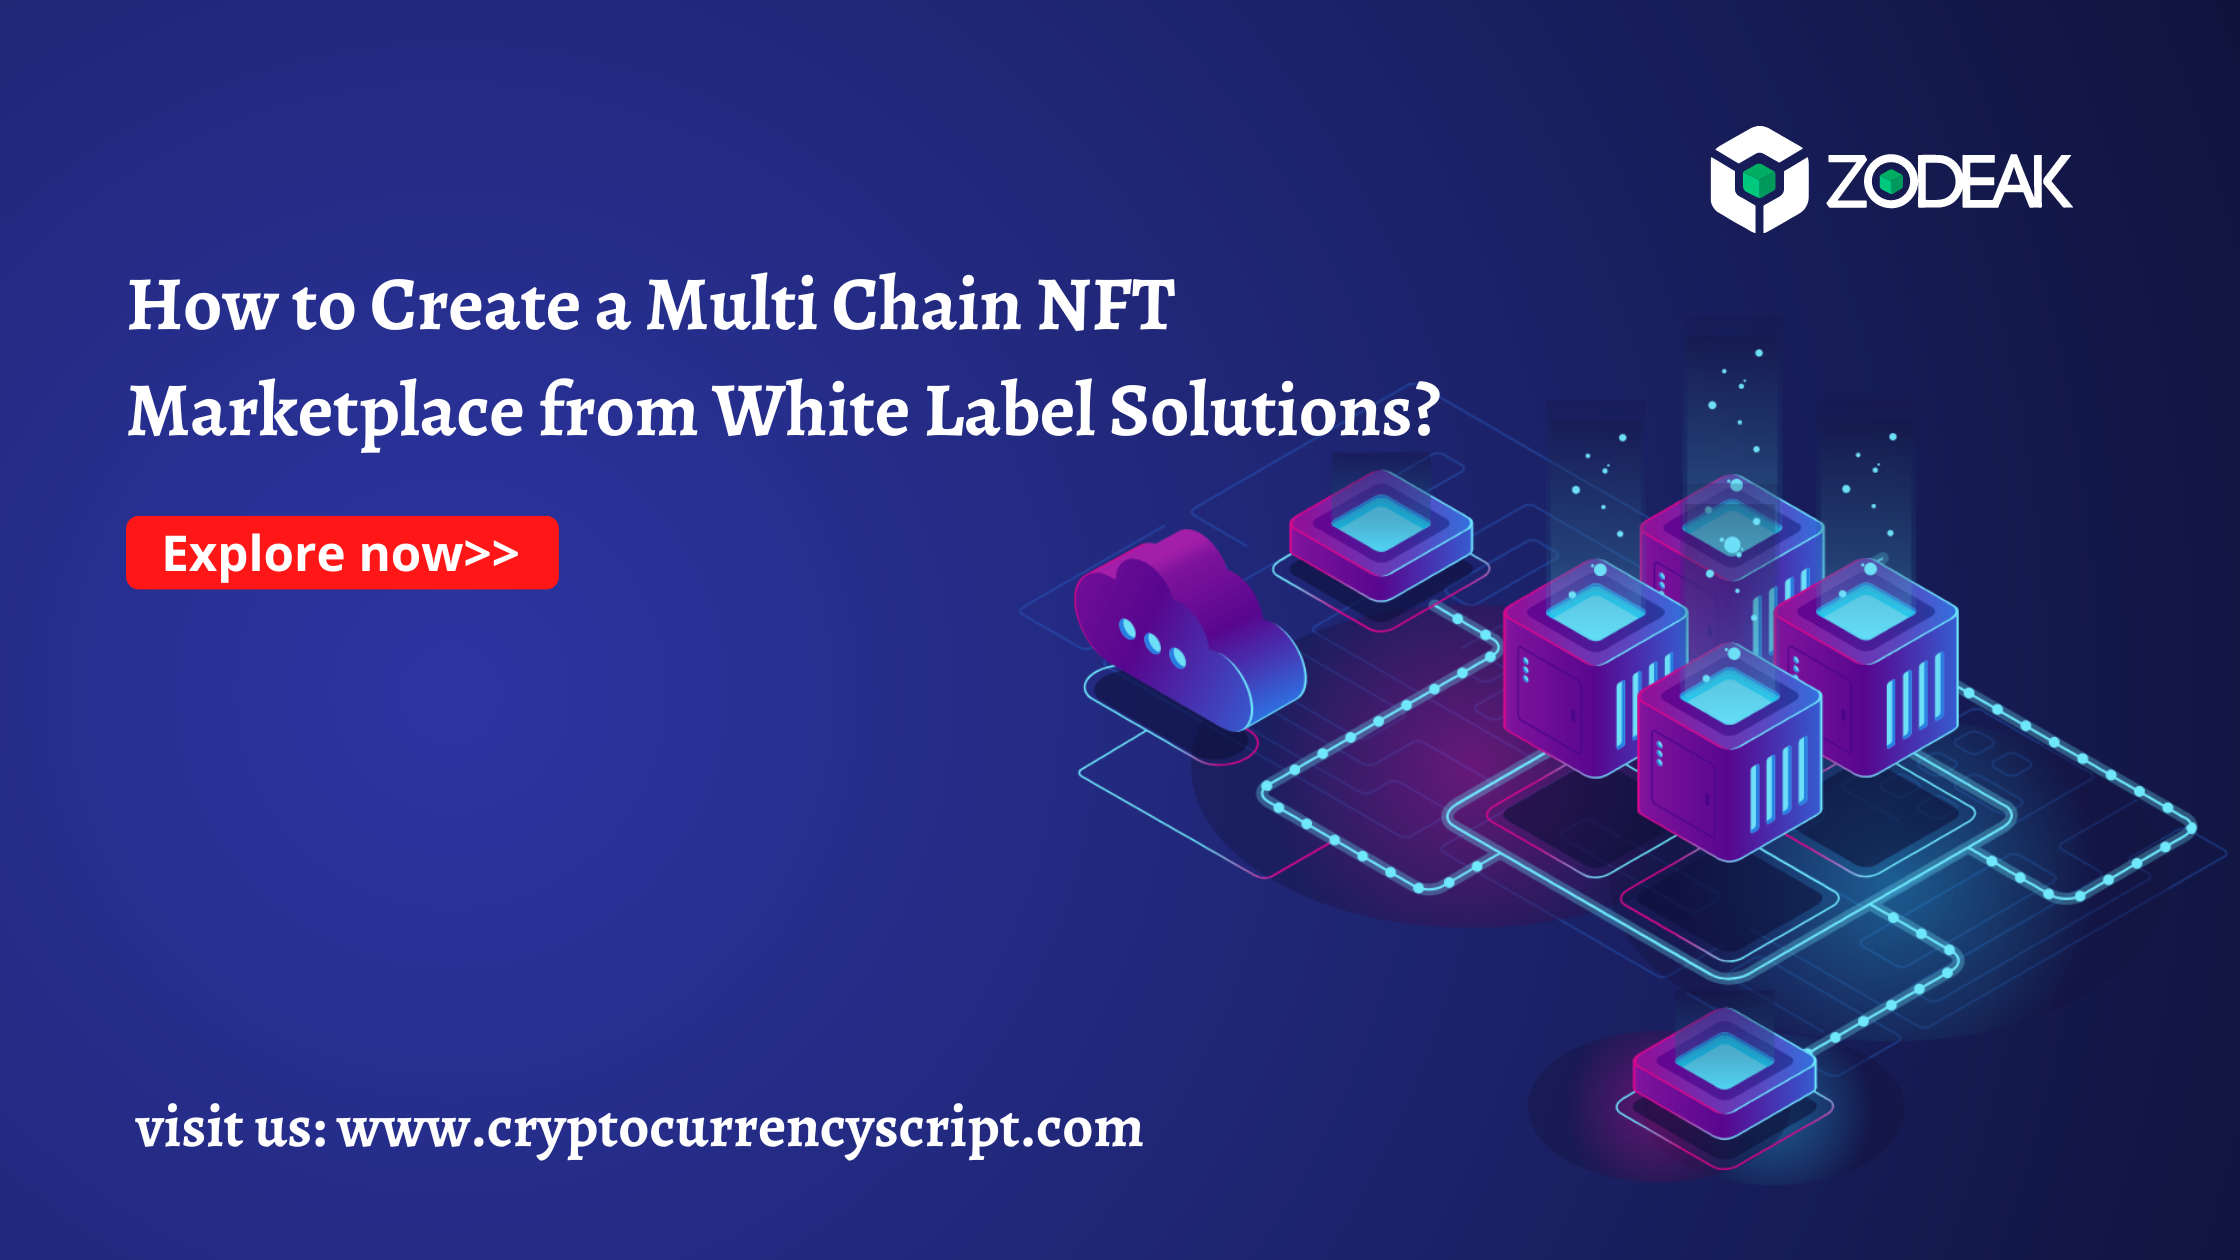 How to Create a Multi Chain NFT Marketplace from White Label Solutions?